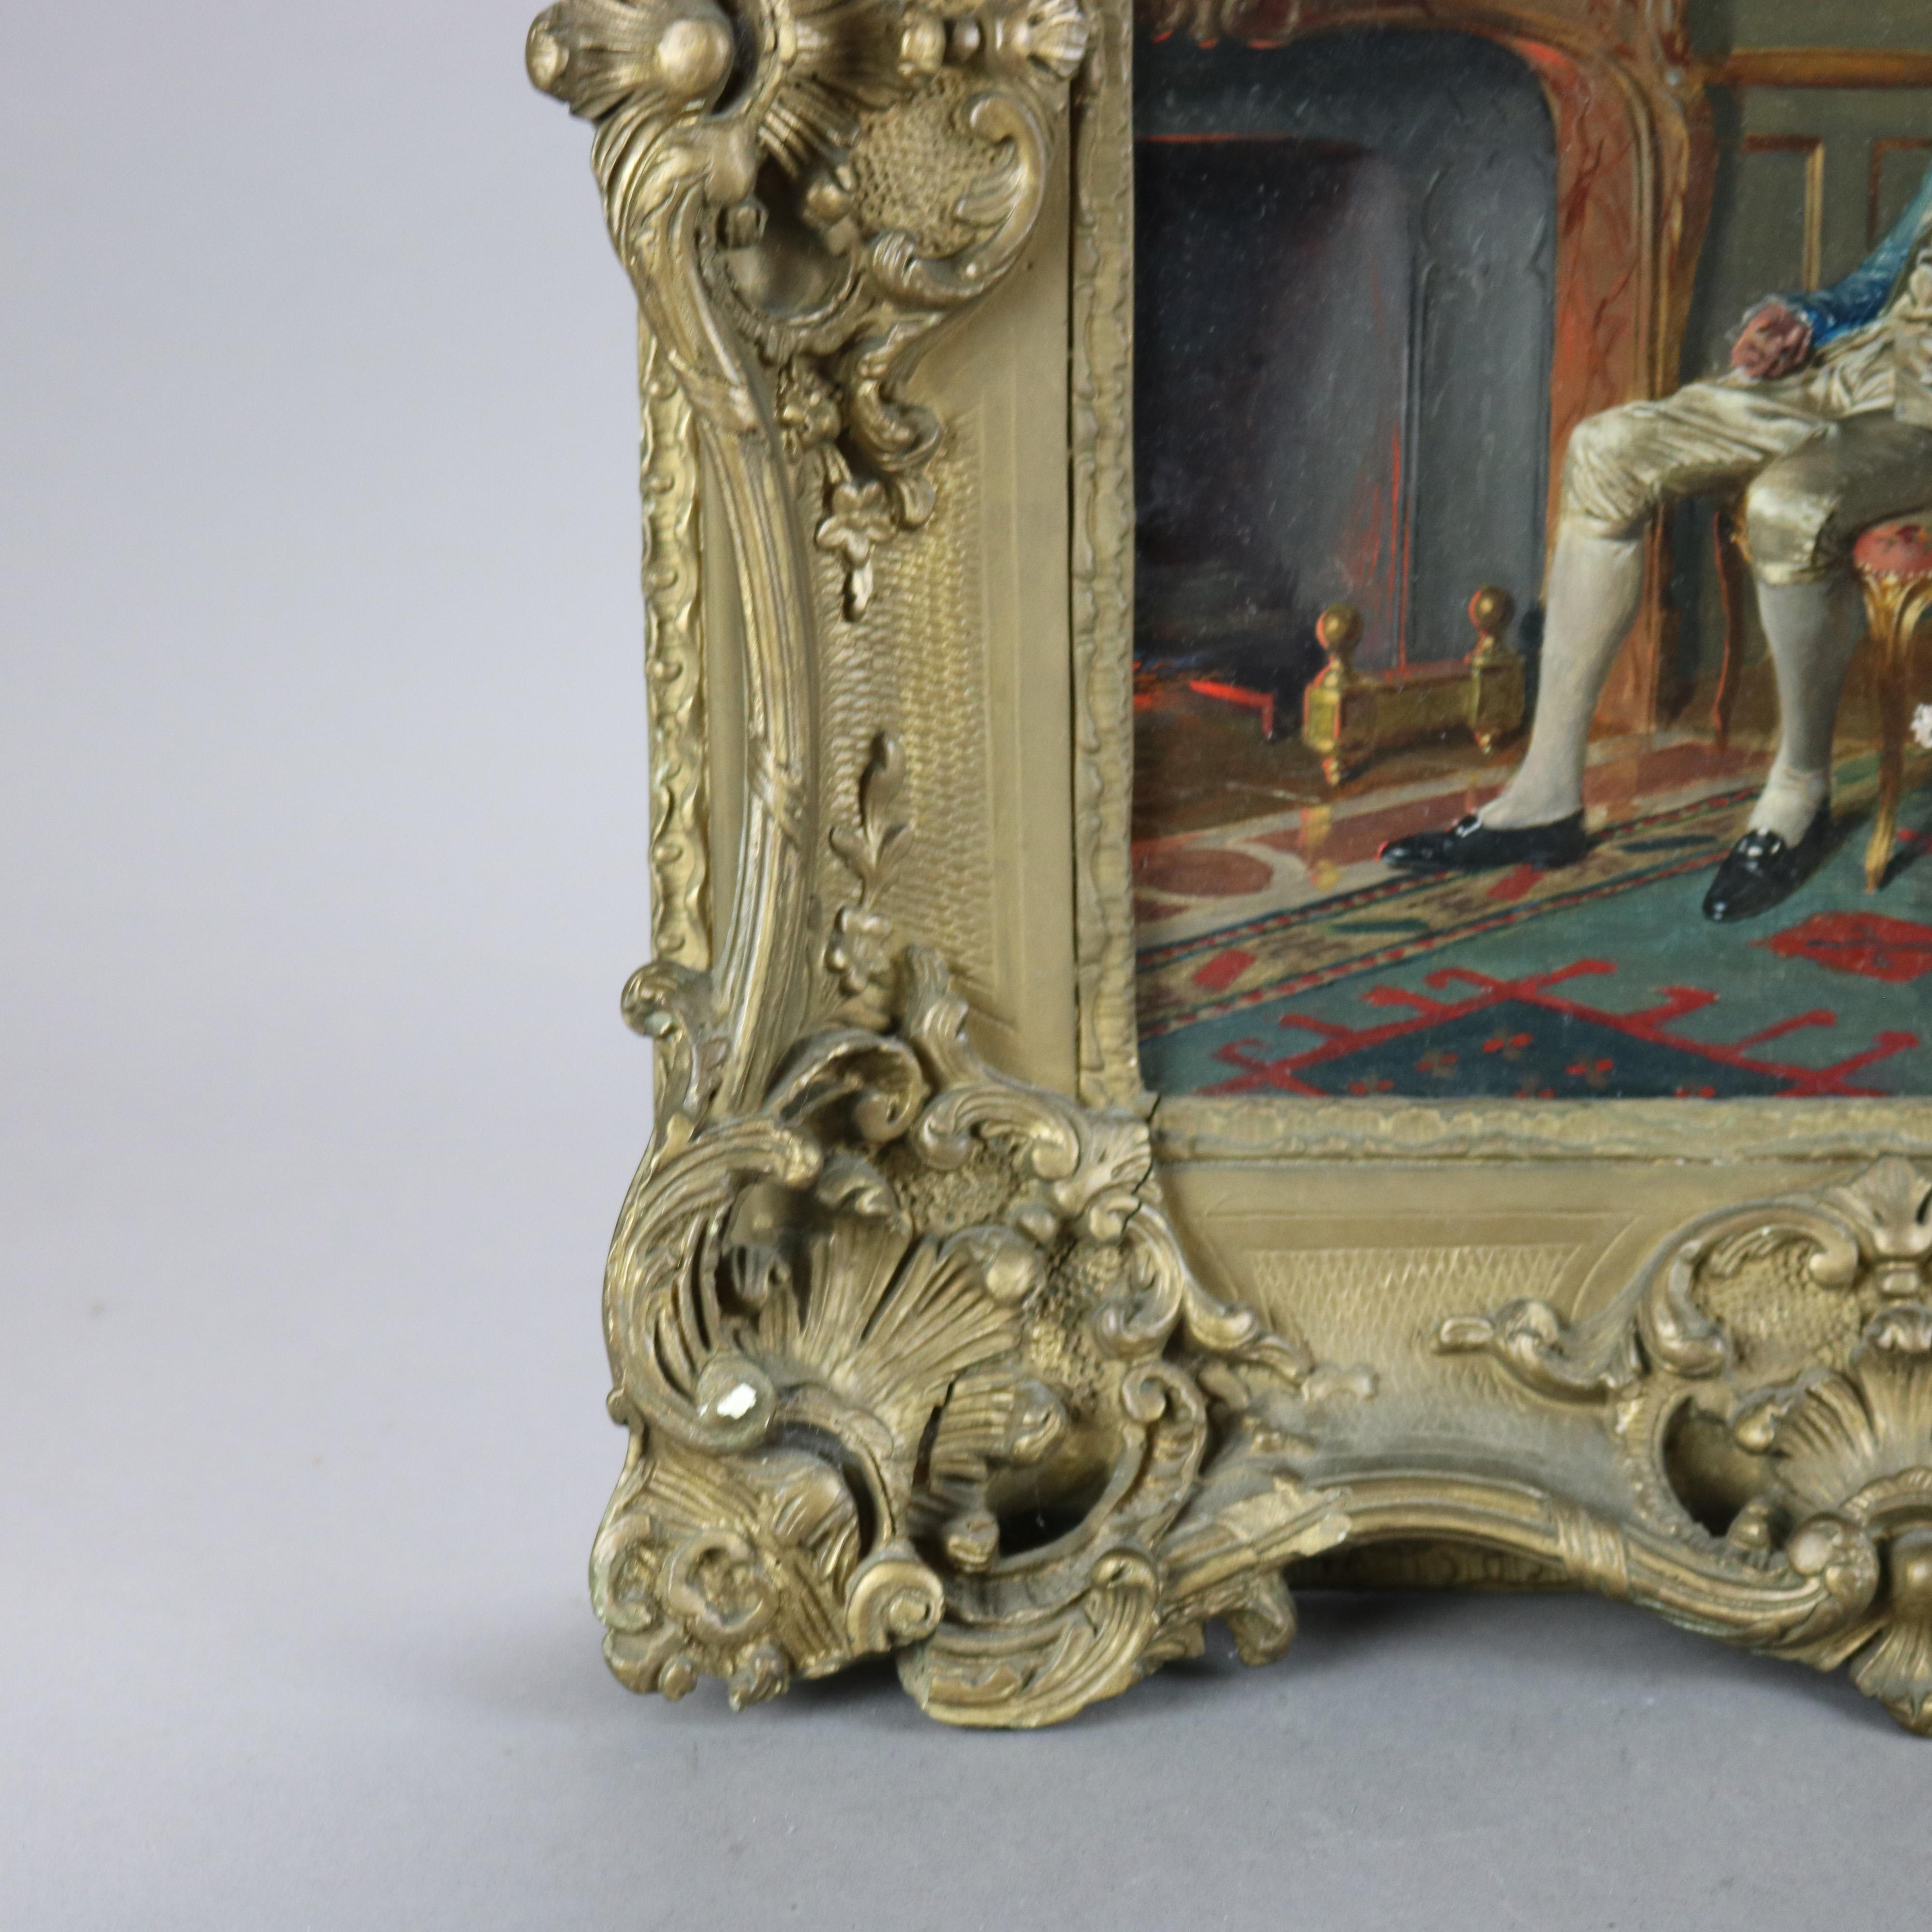 19th Century Antique French Painting Genre Interior Parlor Scene Signed Borione, c1870